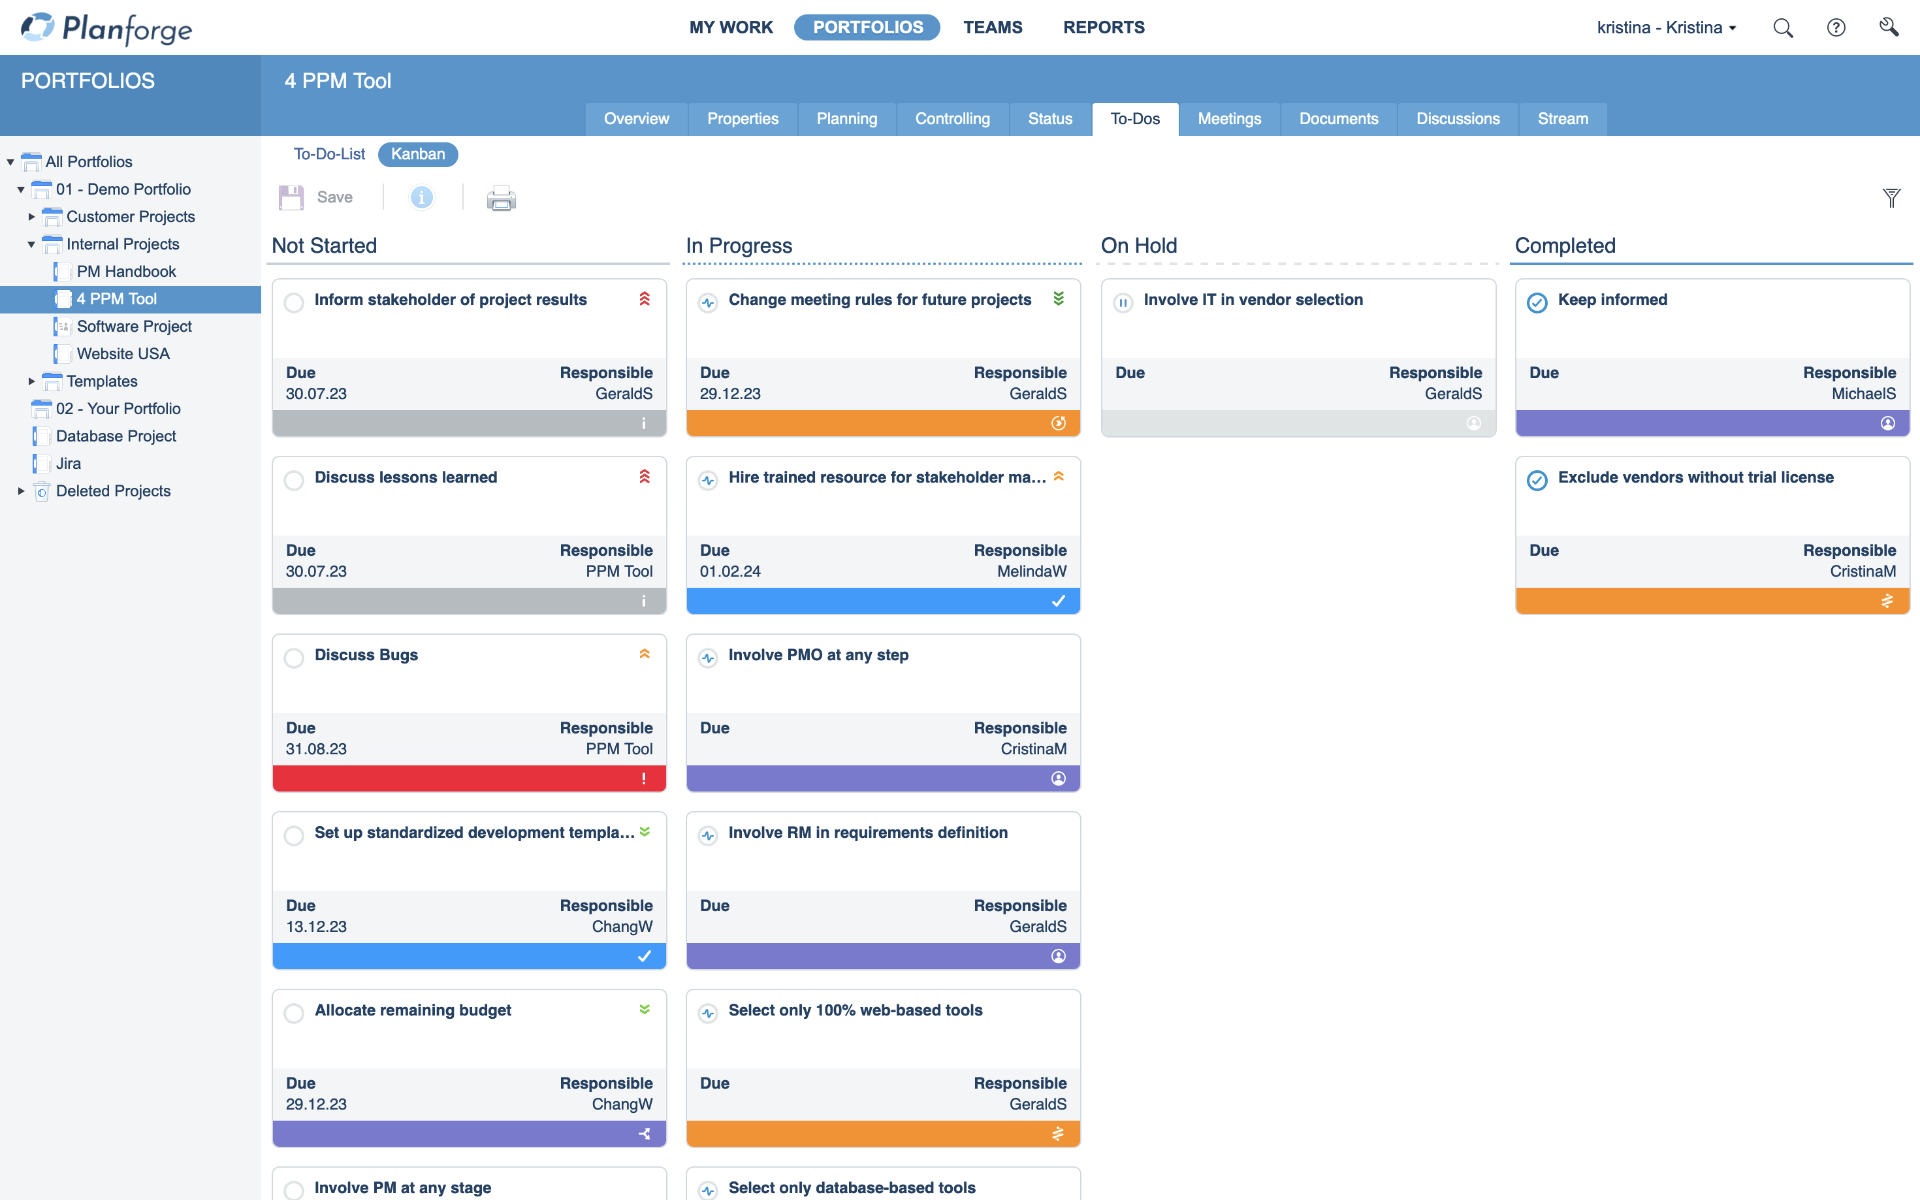 Project Management Todos Kanban Board Software by Planforge